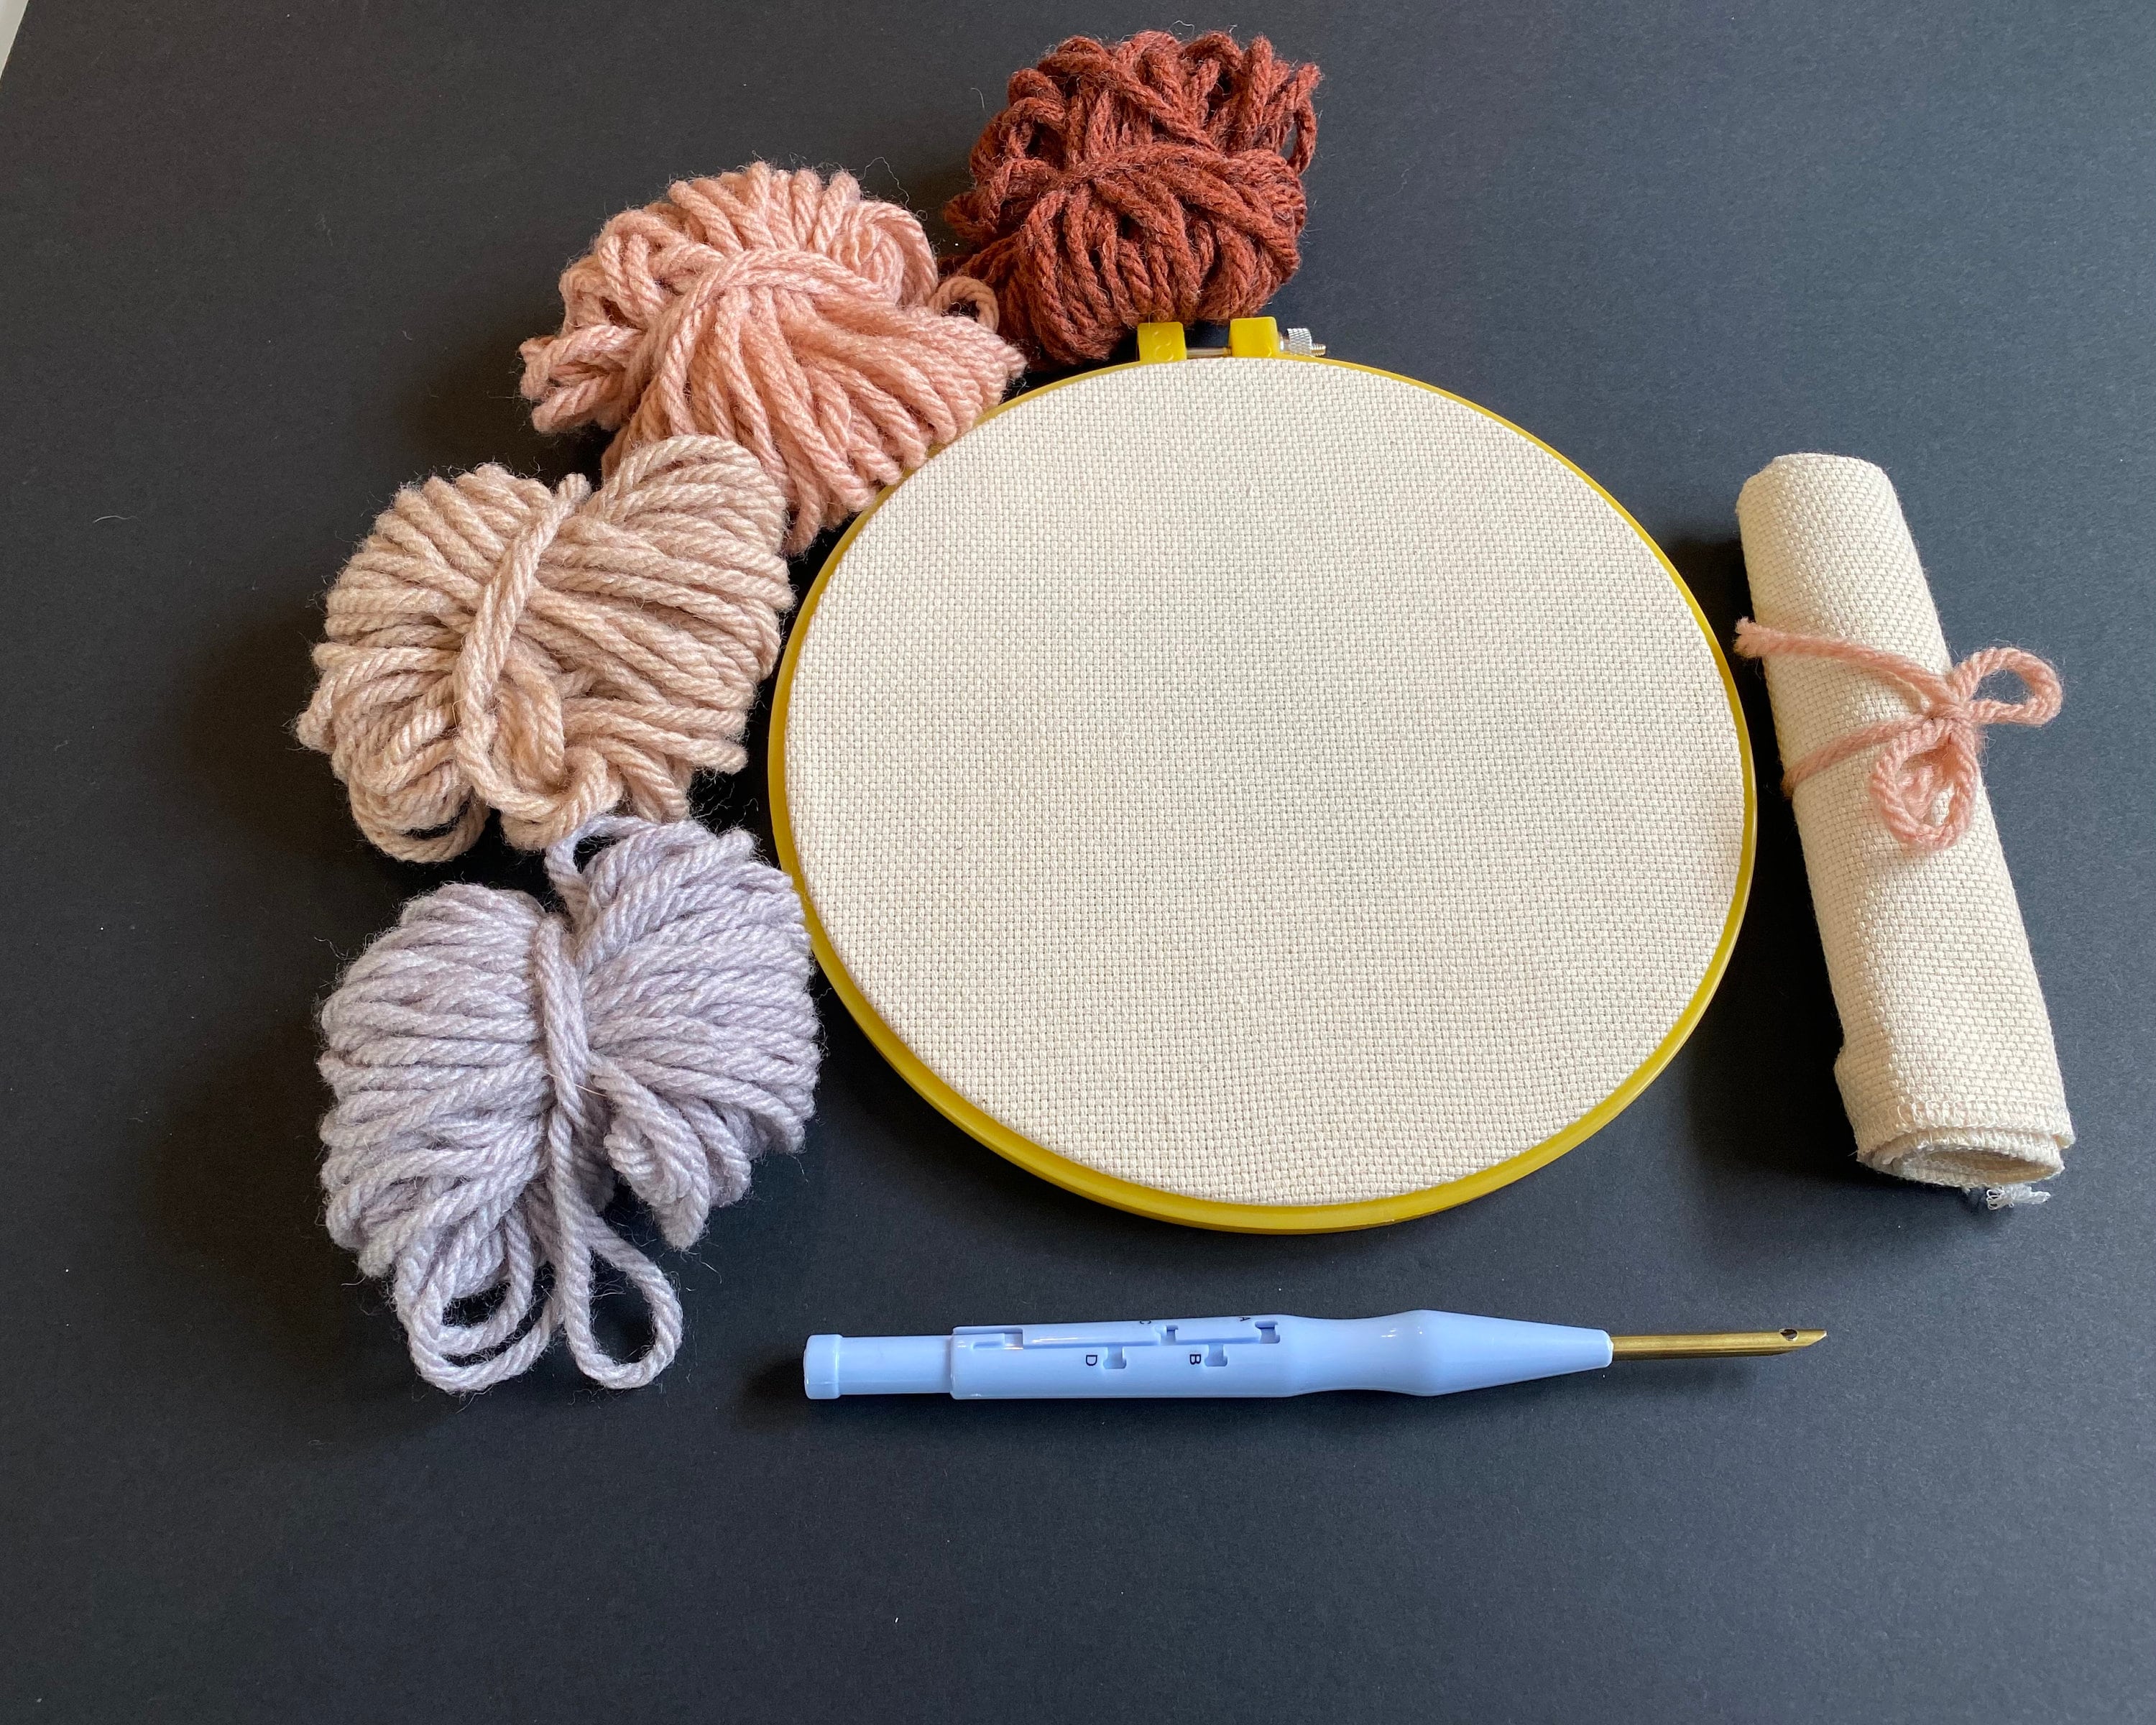 PUNCH NEEDLE KIT for Beginners  Everything You Need to Learn How